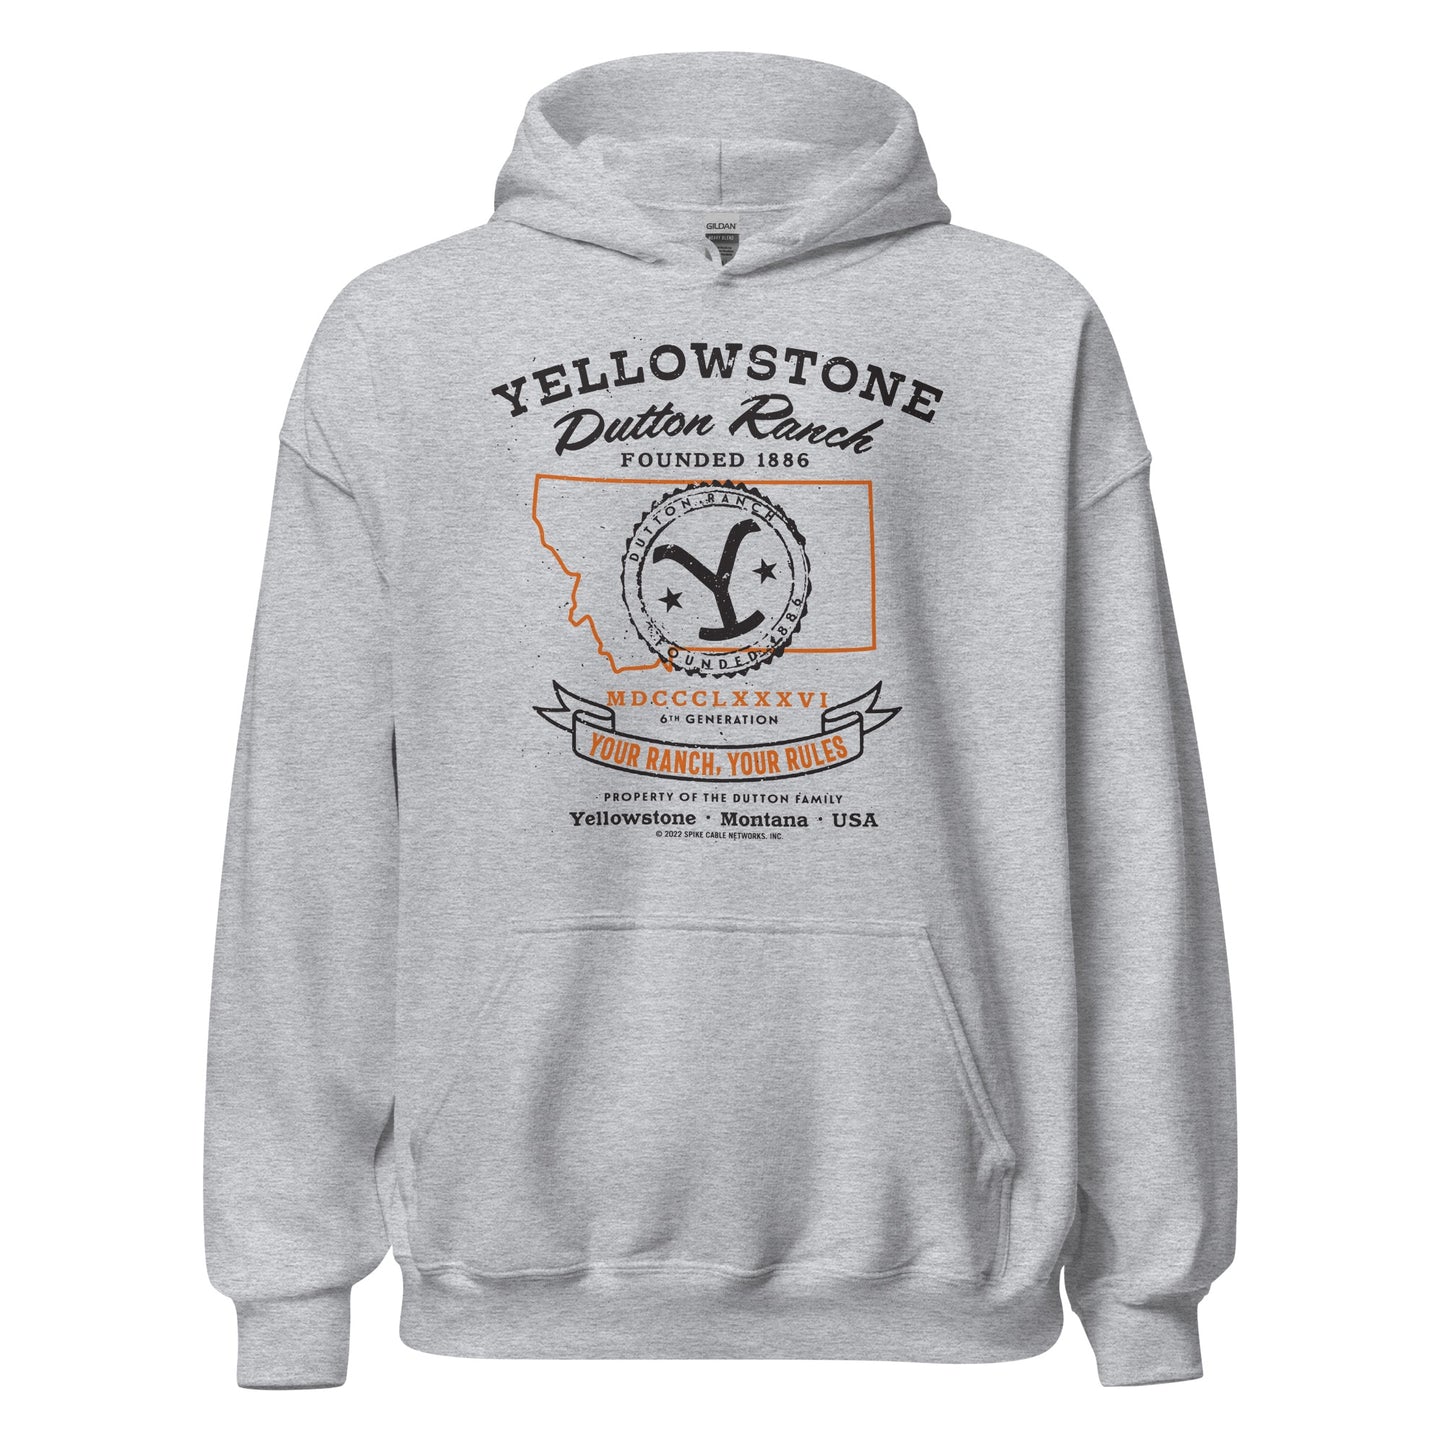 Yellowstone Dutton Ranch Your Ranch Your Rules Hooded Sweatshirt